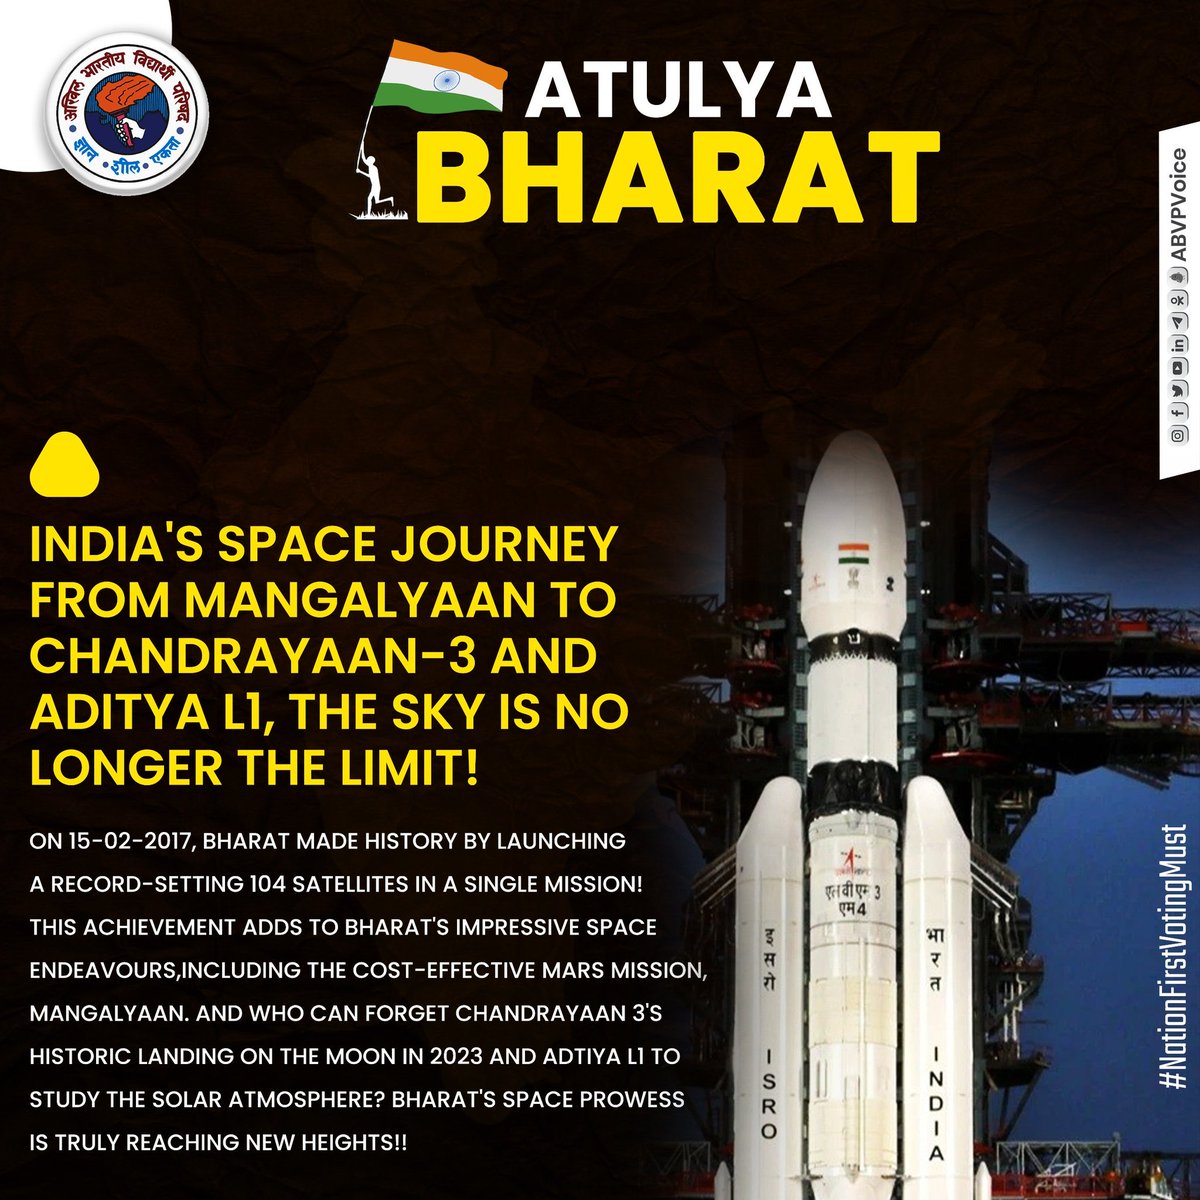 India's space journey from MANGALYAAN to CHANDRAYAAN-3 and ADITYA L1, the sky is no longer the limit! 

#NationFirstVotingMust #ABVP